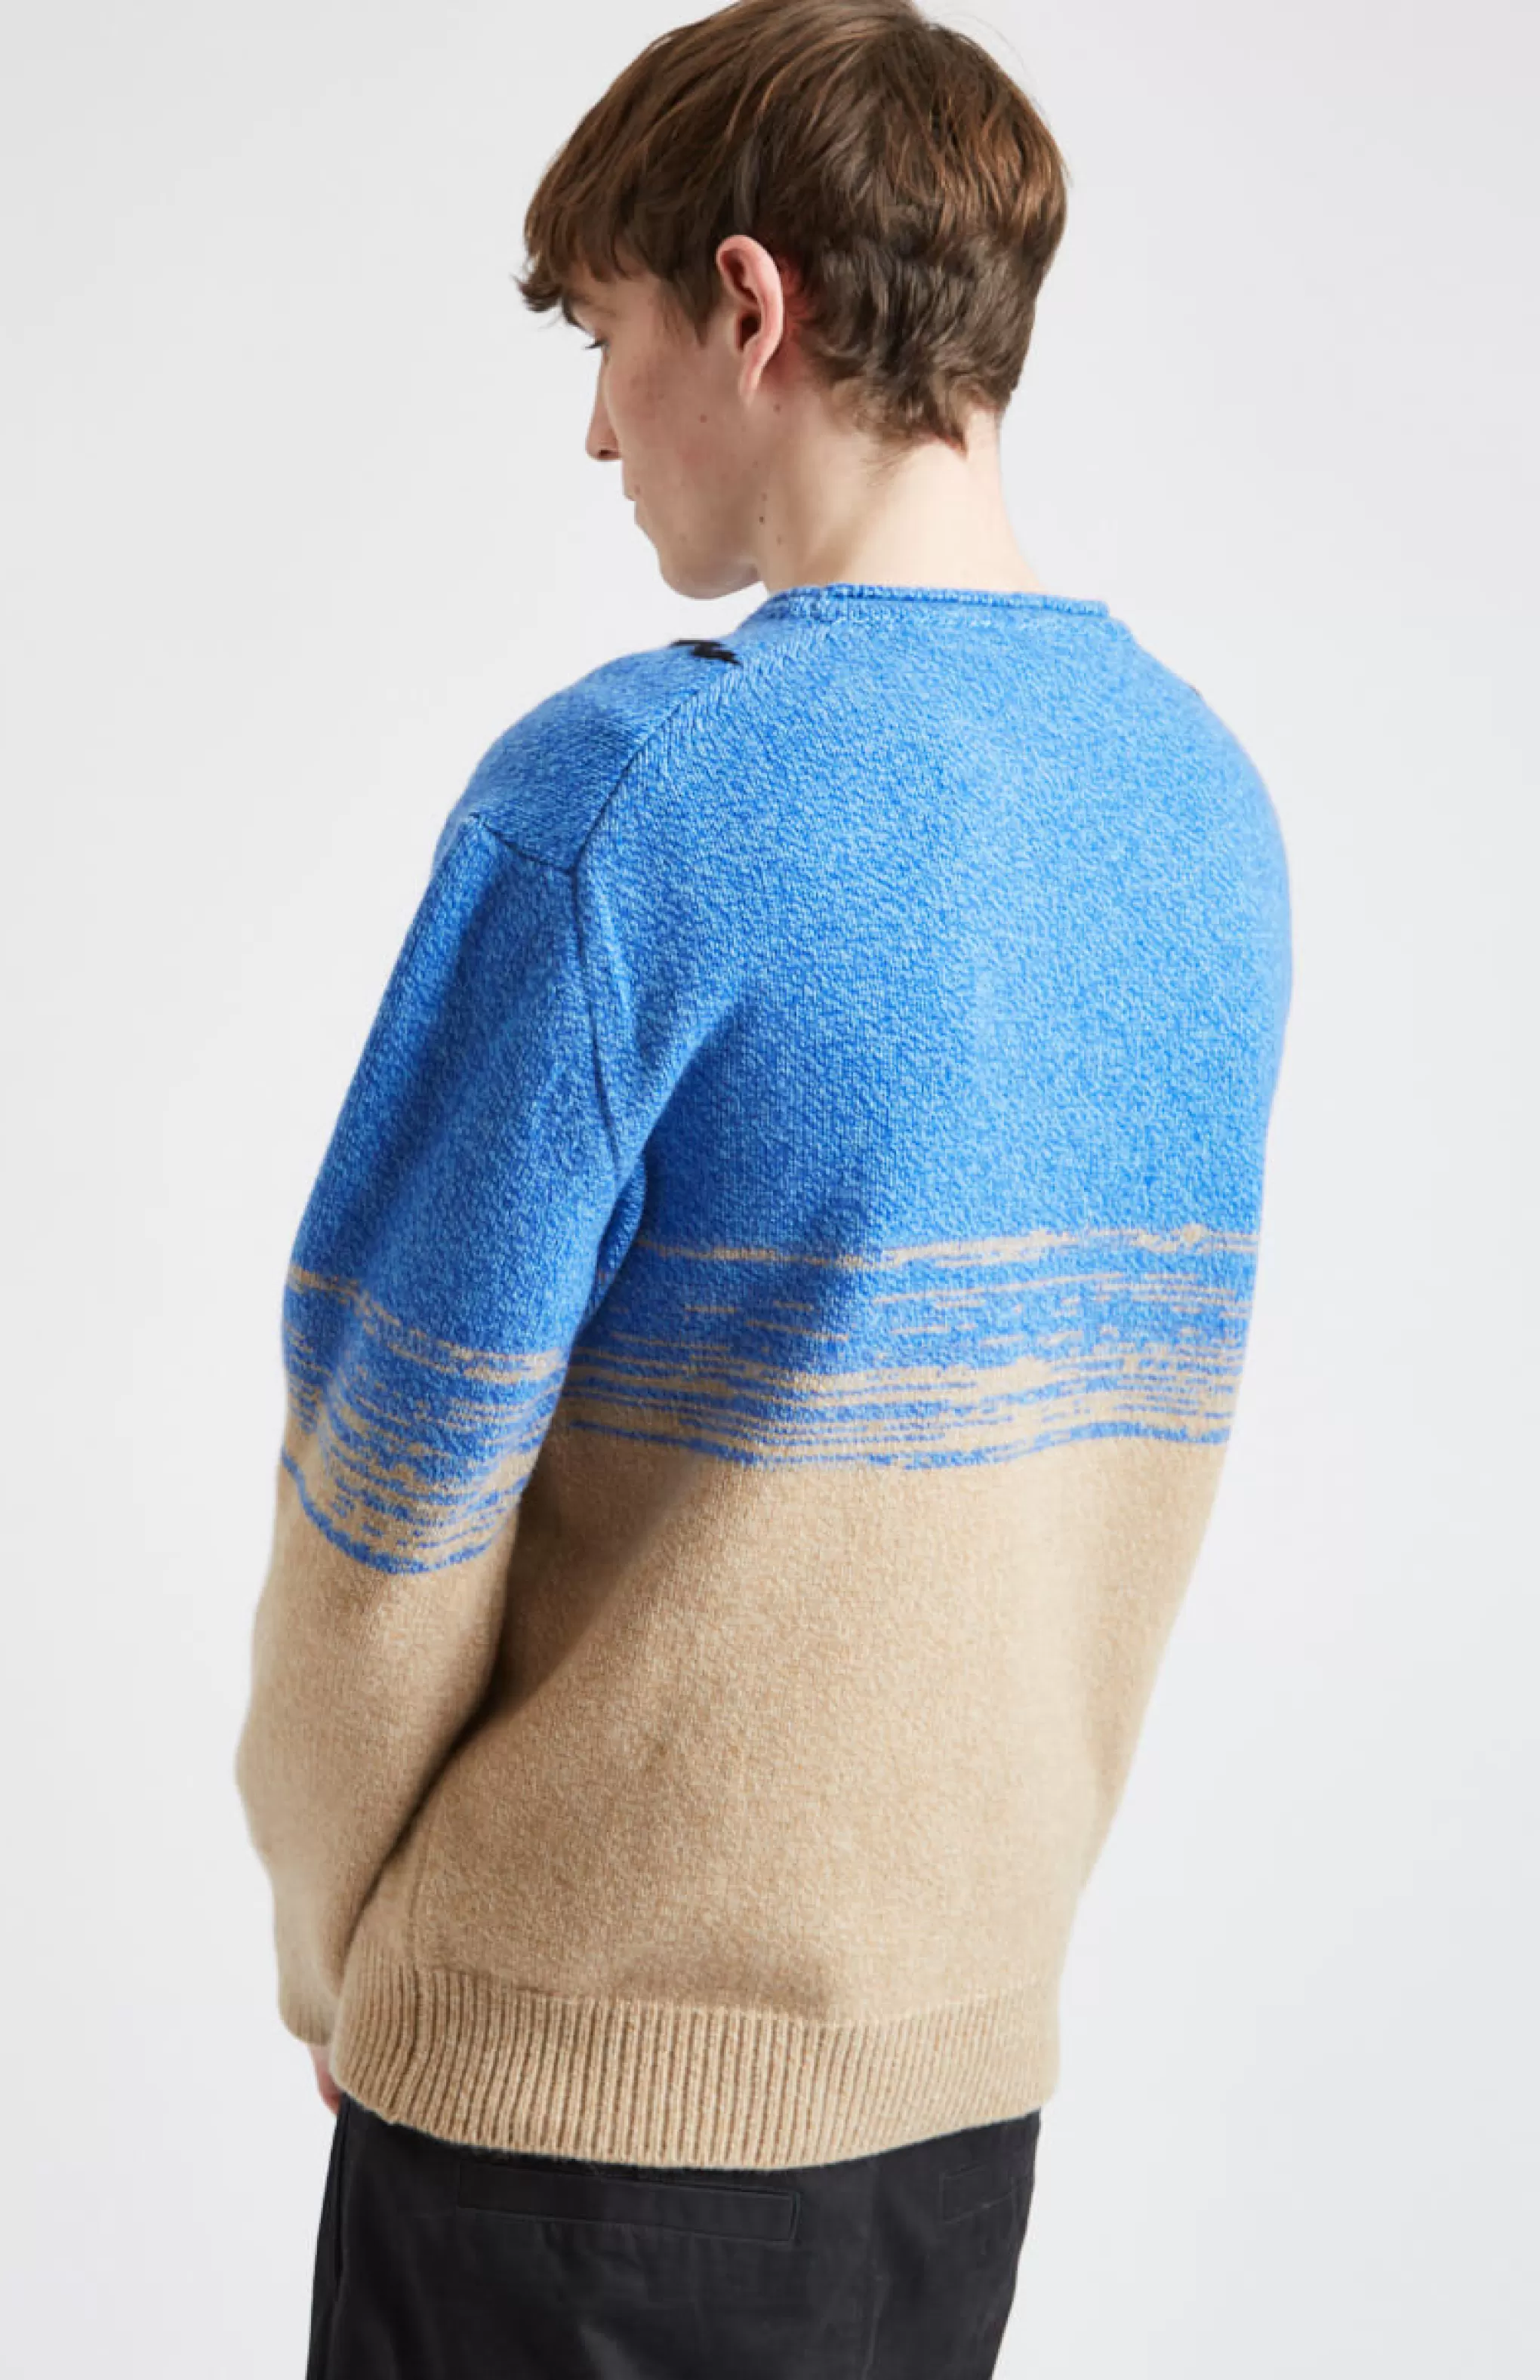 Best Lambswool Round Neck Jumper With Argyle Pattern And Degrade Effect In Cobalt And Camel Men Loungewear